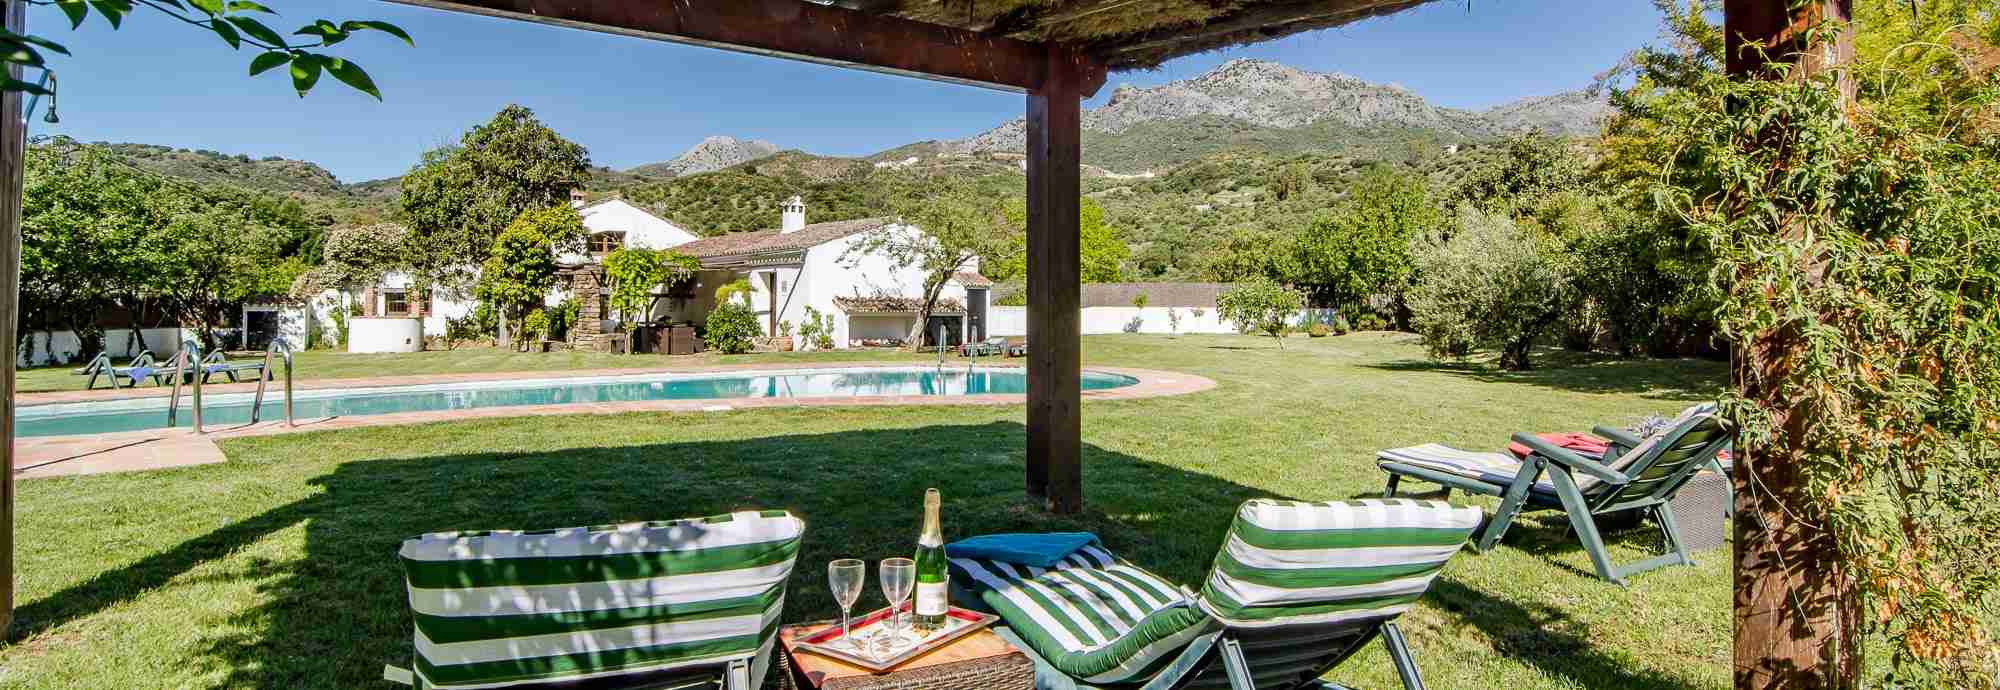 4 bed garden villa with pool in well-connected Ronda Mountain valley